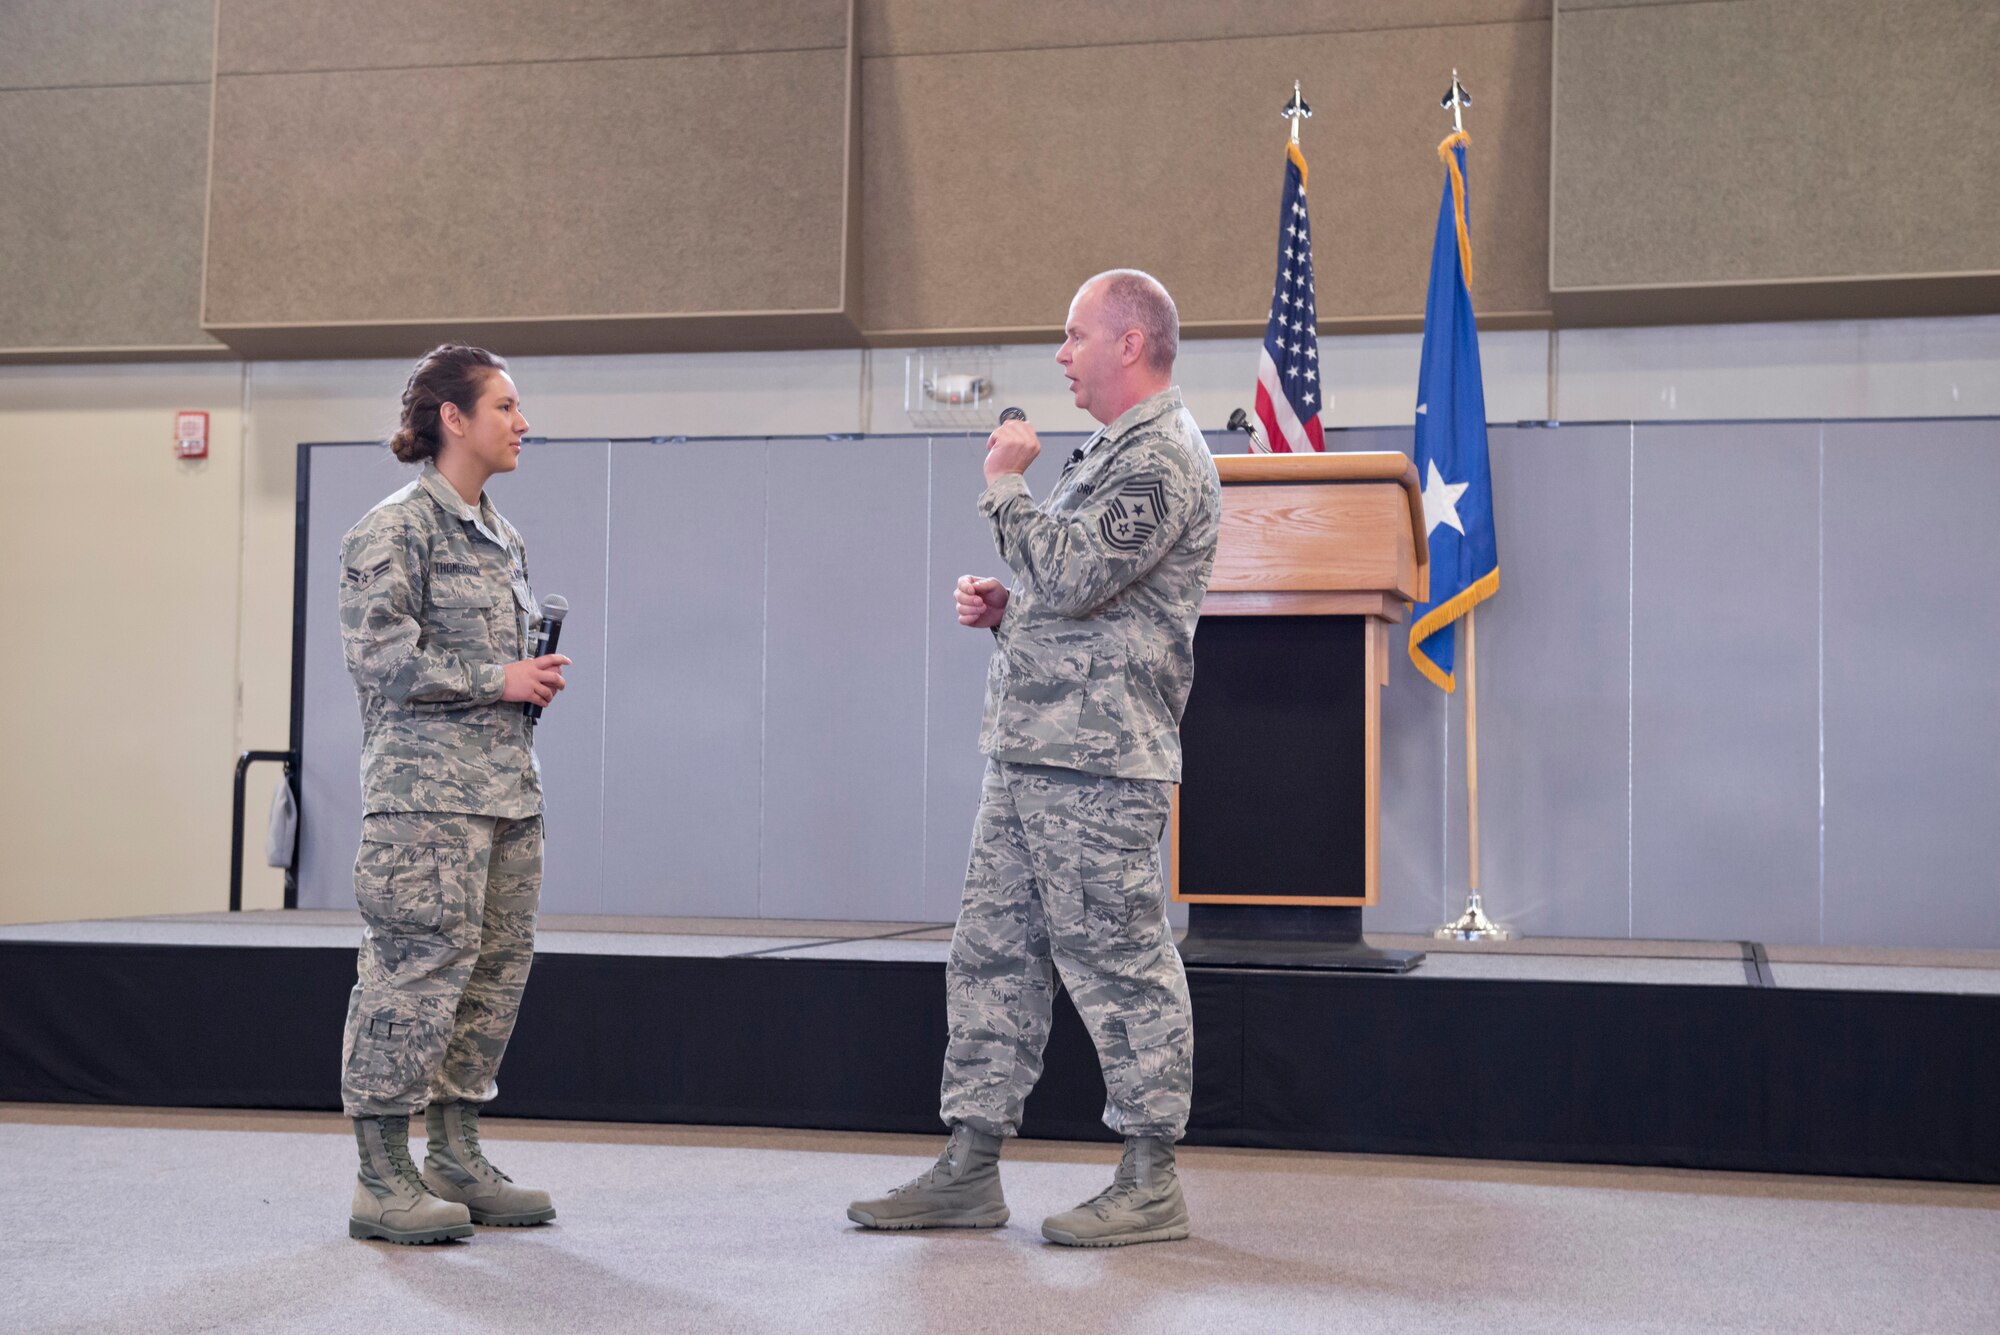 The Command Chief Master Sgt. of the Air National Guard (CCM ANG), Chief Master Sgt. James W. Hotaling (right) presents Airman 1st Class Jessica Thomerson (left), 132d Geospatial Intelligence, with his coin during the 132d Wing, Des Moines, Iowa May Off-Site Resiliency Event held at the Valley Community Center, West Des Moines, Iowa on Saturday, May 2, 2015; Thomerson is receiving Hotaling’s coin because she shared her stories of Basic Military Training at Lackland Air Force Base, San Antonio, Texas with the group (per Hotaling's request).  The Director of the Air National Guard (DANG), Lt. Gen. Stanley E. Clarke III, is also in attendance, which marks the first time in history that both the DANG and CCM ANG visit an ANG wing together.  (U.S. Air National Guard photo by Tech. Sgt. Linda K. Burger/Released)